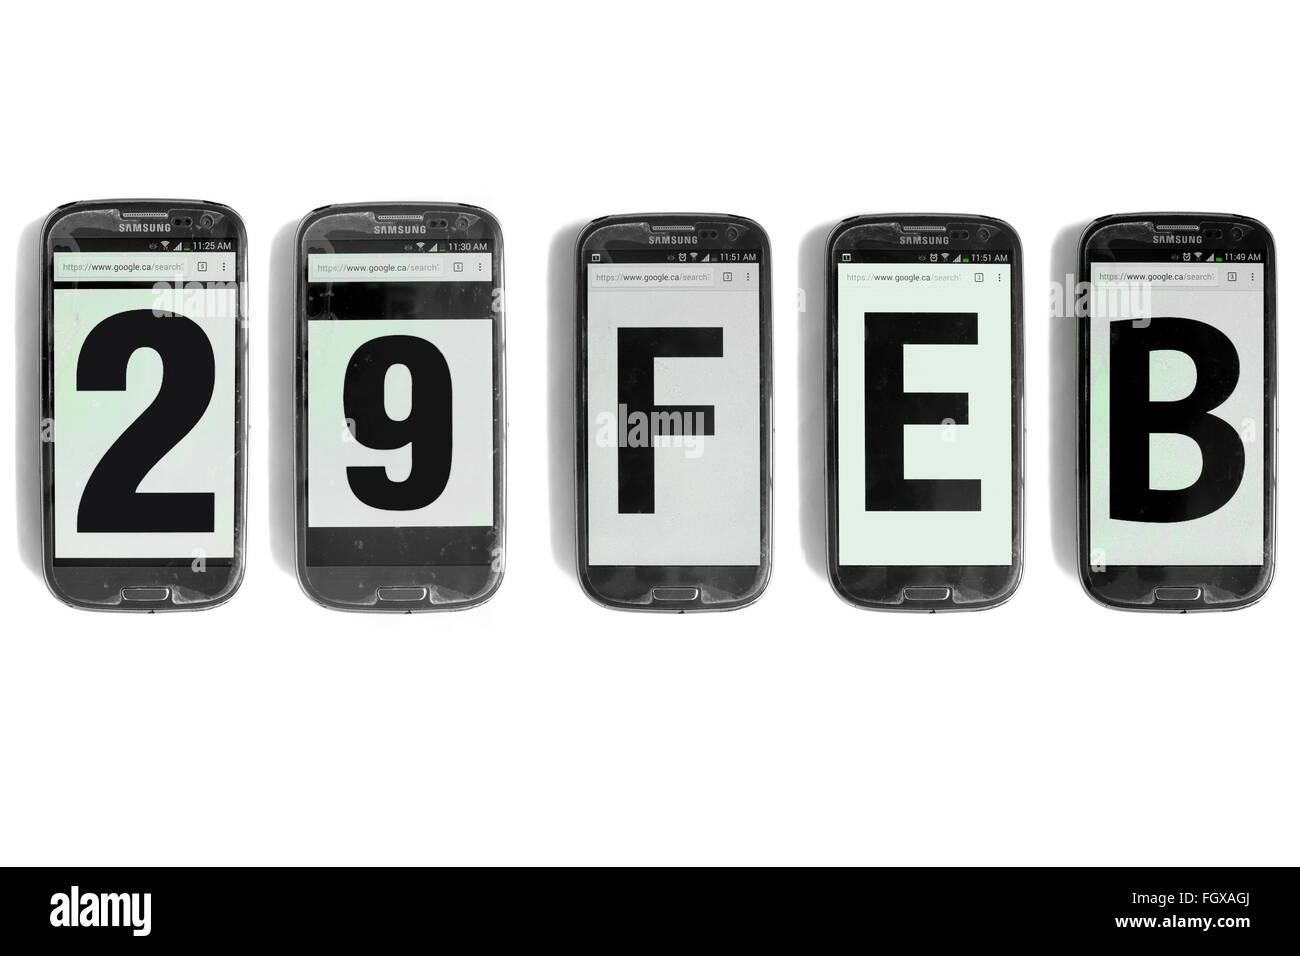 29 Feb written on the screens of smartphones photographed against a white background. Stock Photo